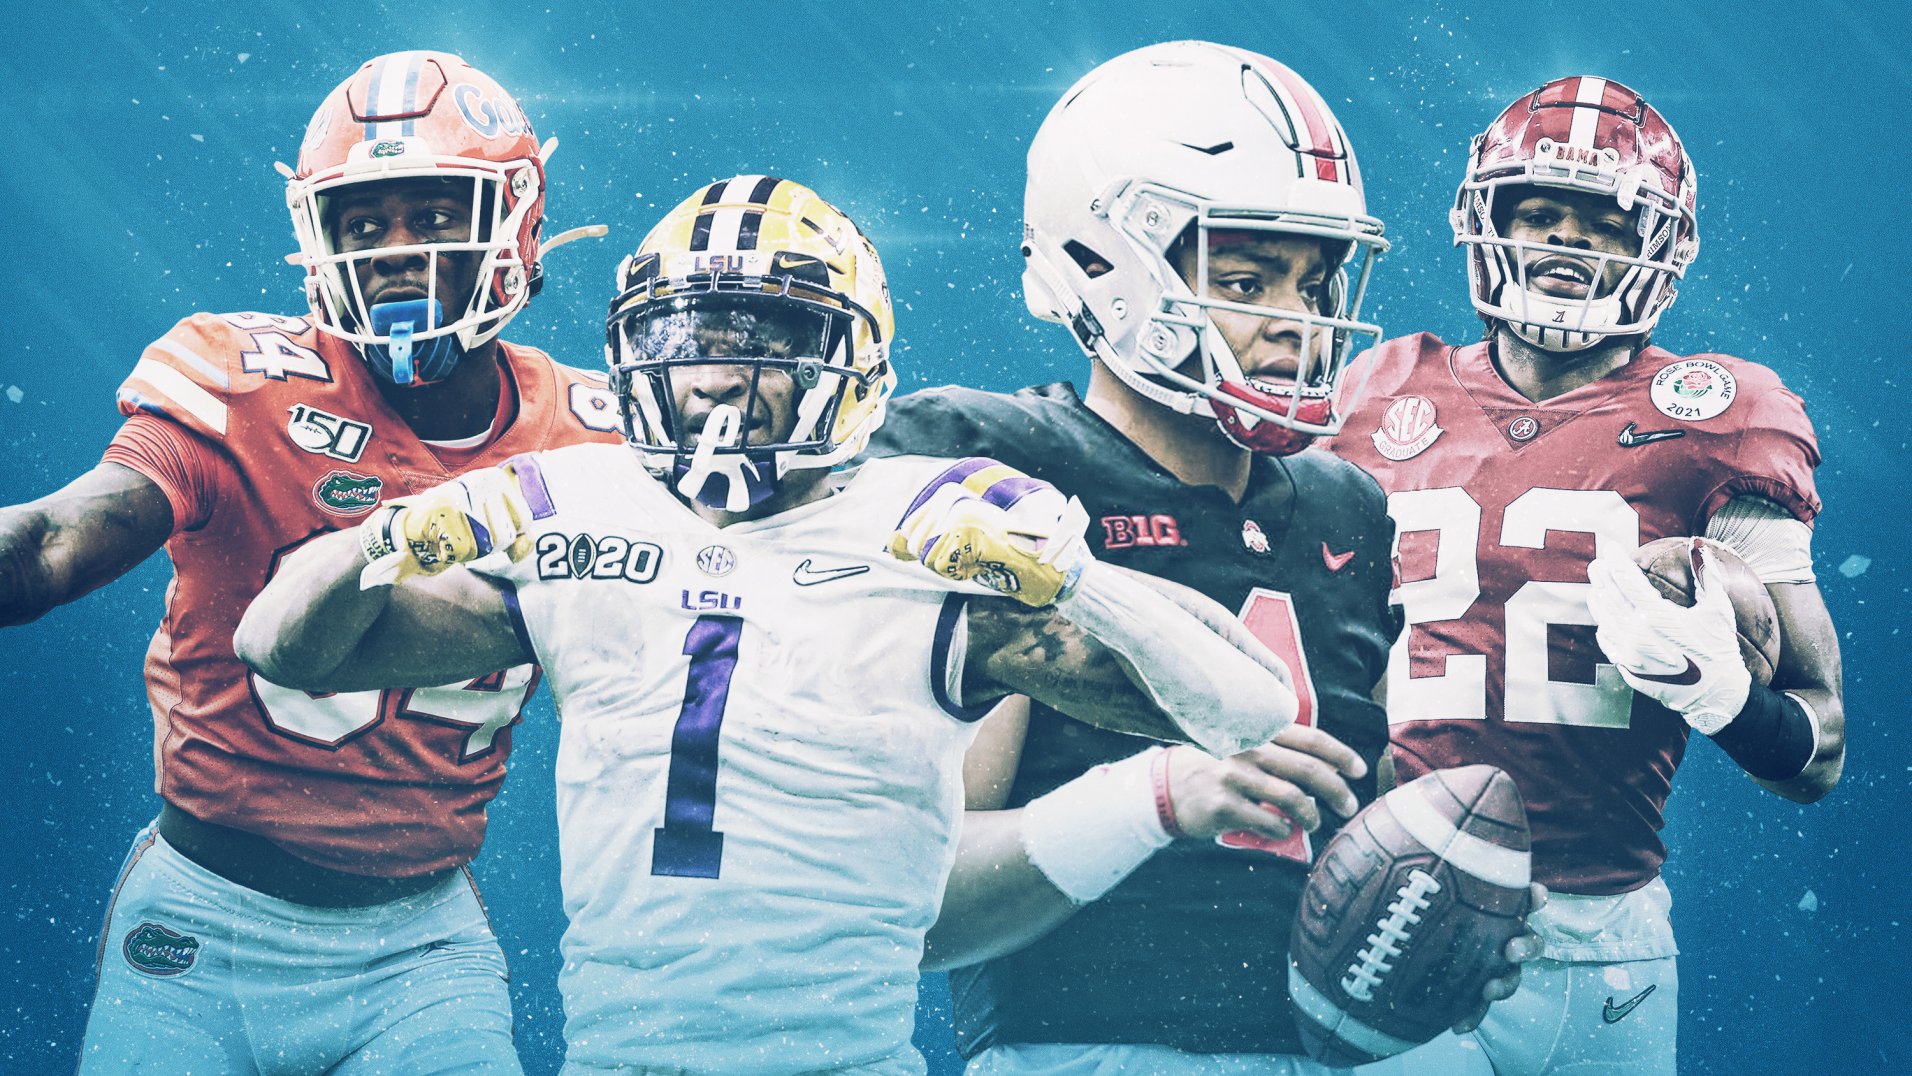 Top Fantasy Football Rookies To Watch In 2021 - SuperDraft Strategy